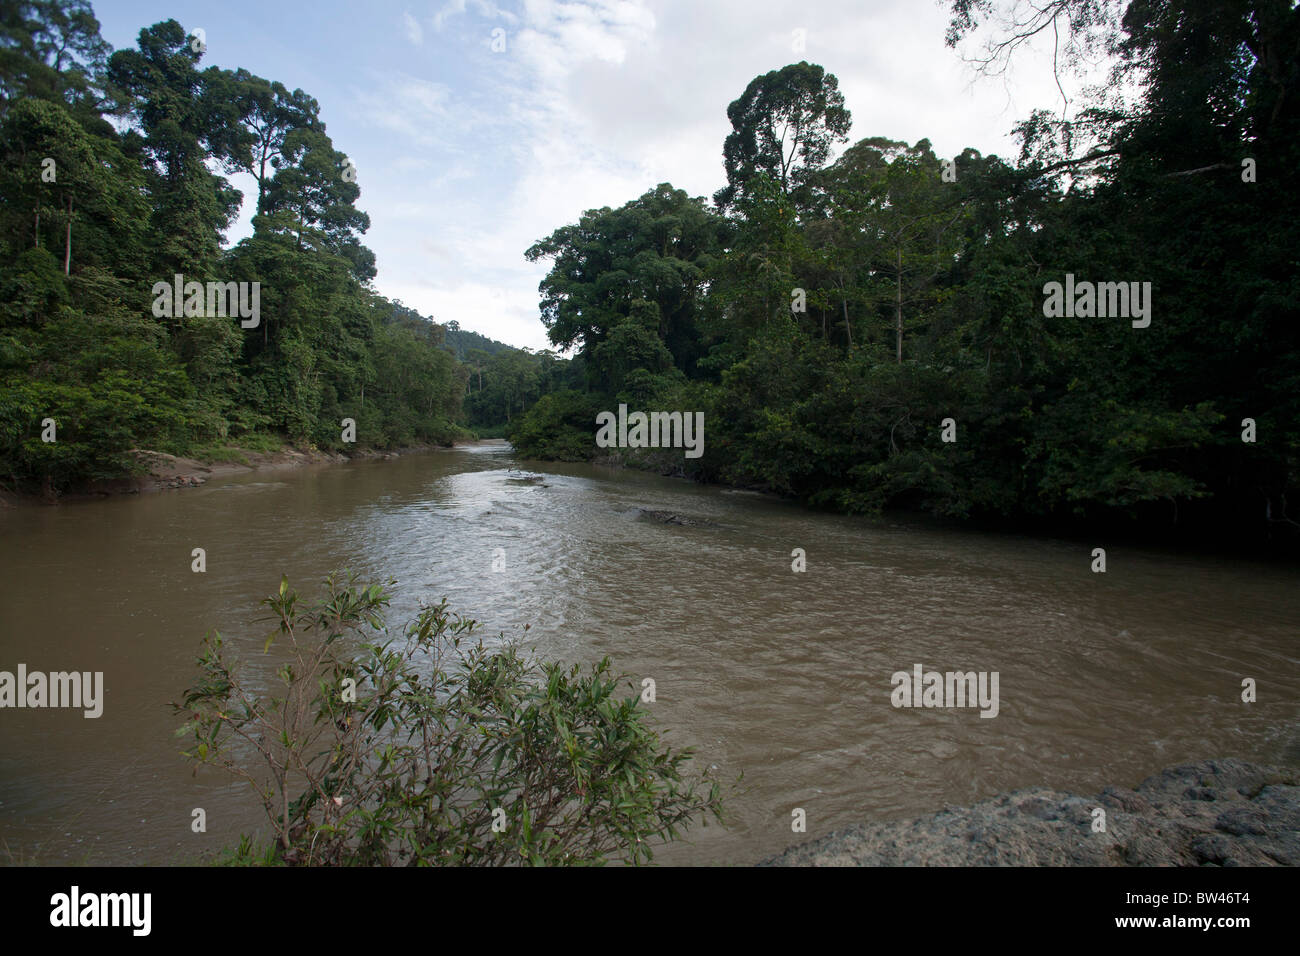 A view of the Segama river near the Danum Valley field center in the Danum Valley Conservation Area, in Sabah, Borneo, Malaysia. Stock Photo